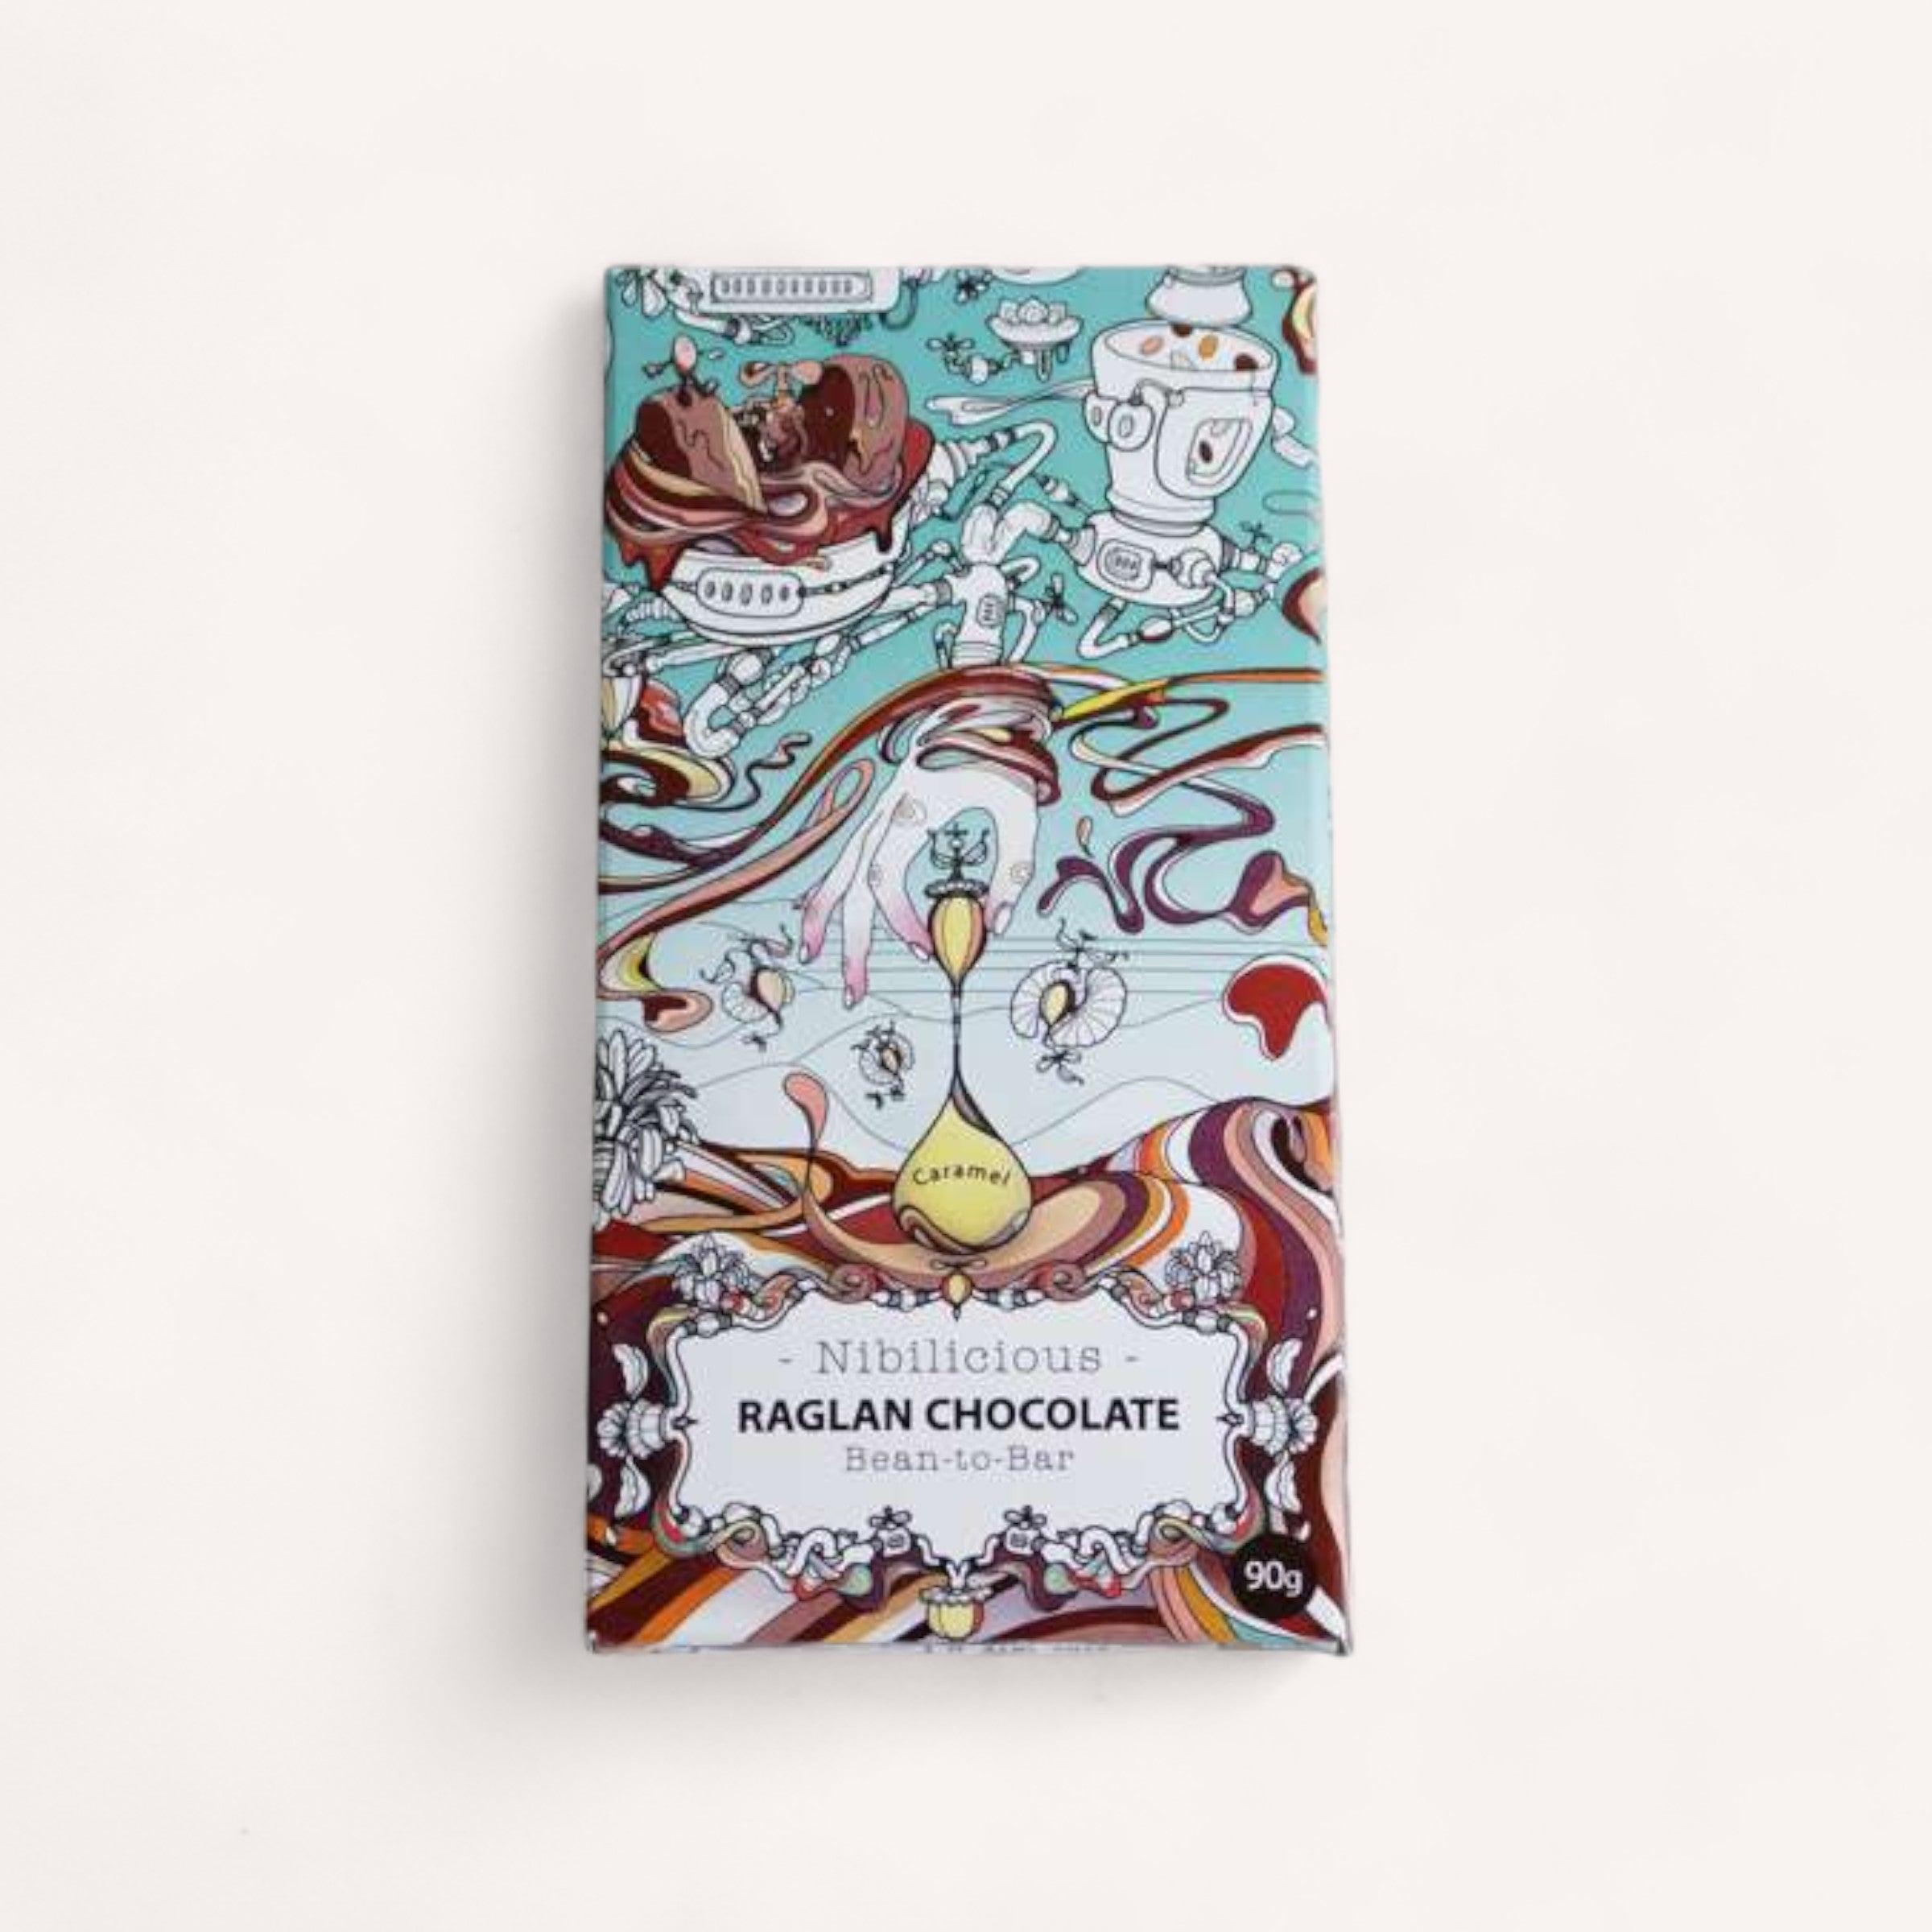 A vibrant and intricately designed Nibilicious by Raglan Chocolate bar wrapper with playful illustrations, featuring a citrus theme for a caramelised white chocolate product.